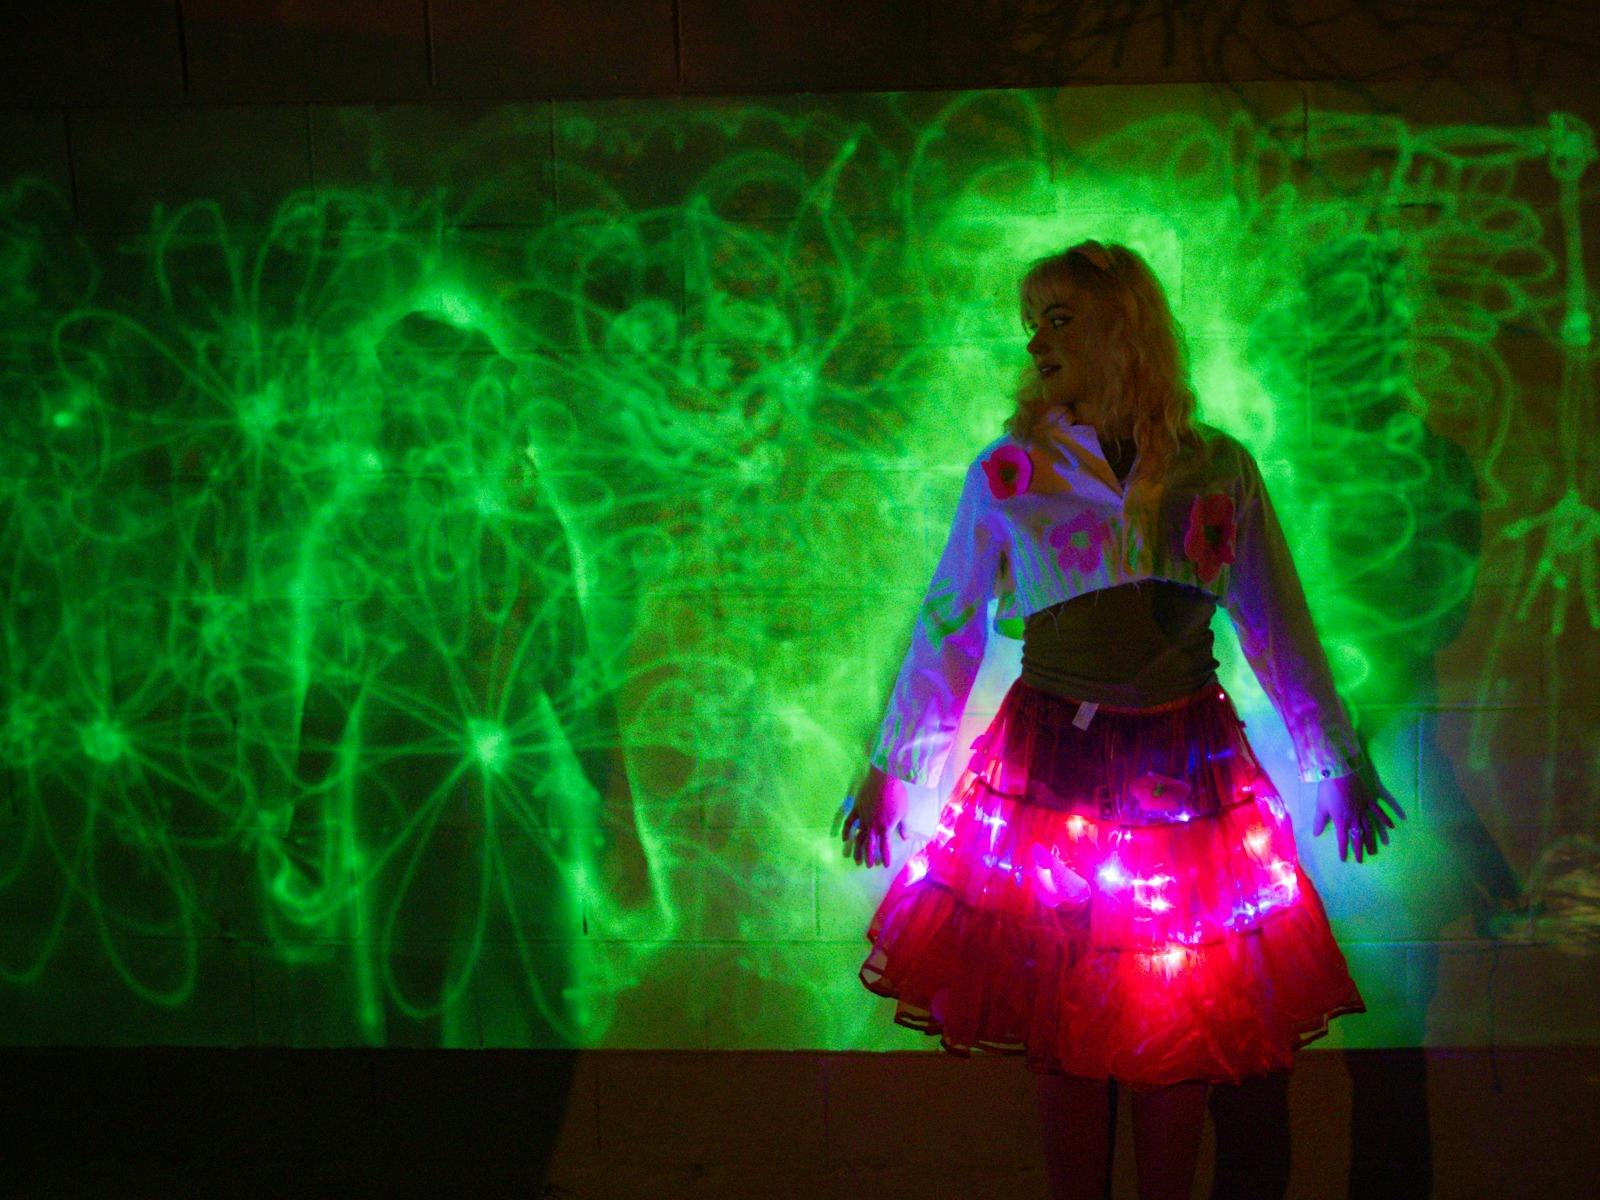 A brightly costumed woman stands against a wall with fluro-green light drawings.